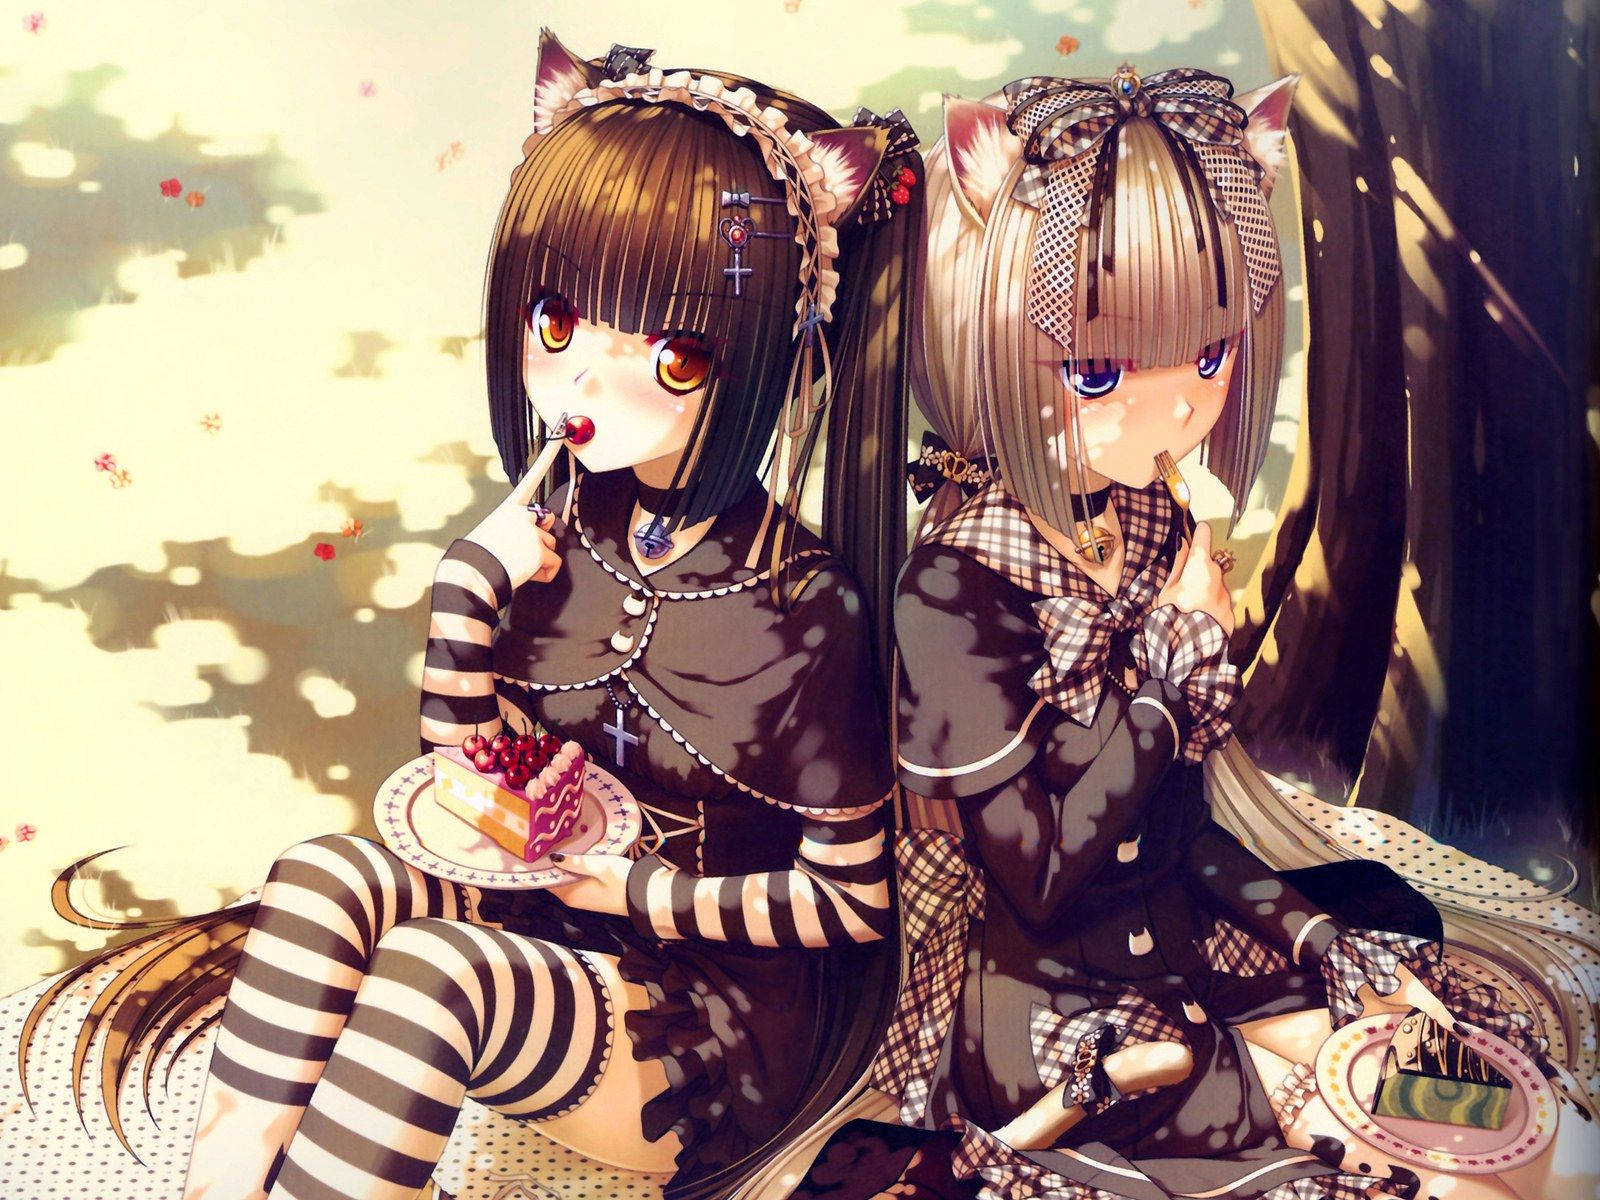 little girls - anime BFF Wallpapers and Images - Desktop Nexus Groups